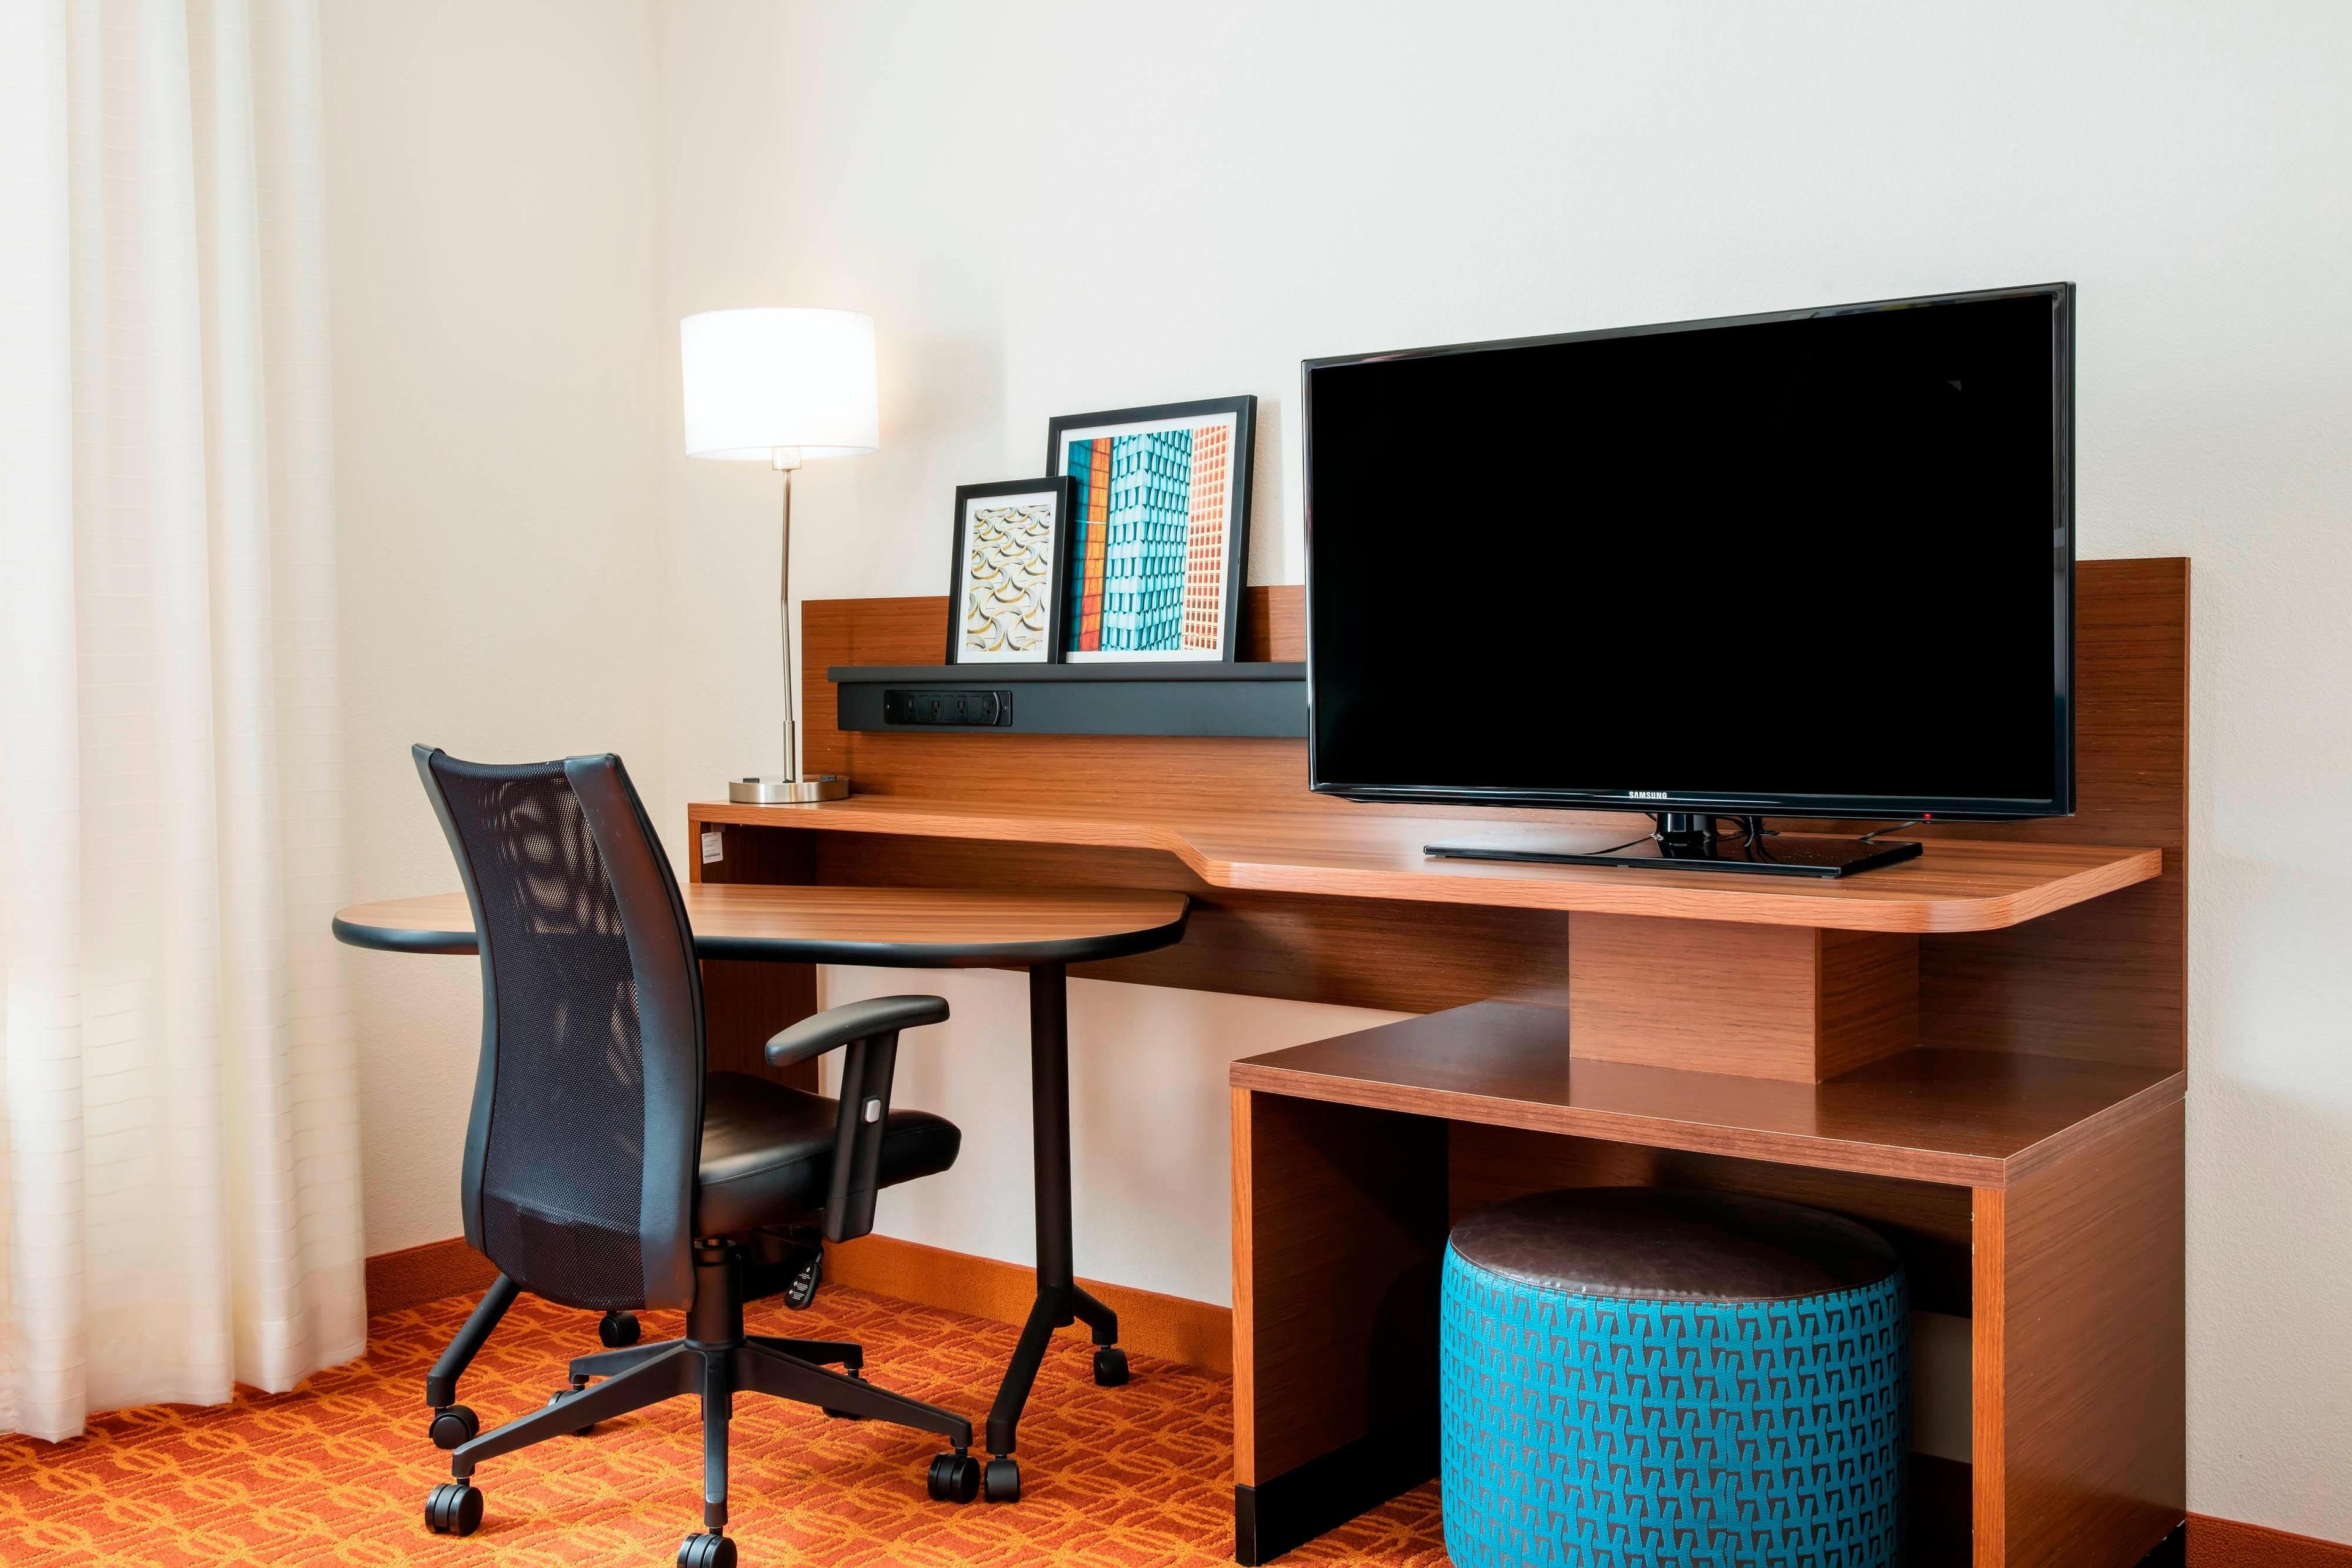 Switch up business as usual with the help of our ergonomic workstations and free high-speed Wi-Fi. Then decompress with a movie on our flat-panel TVs.